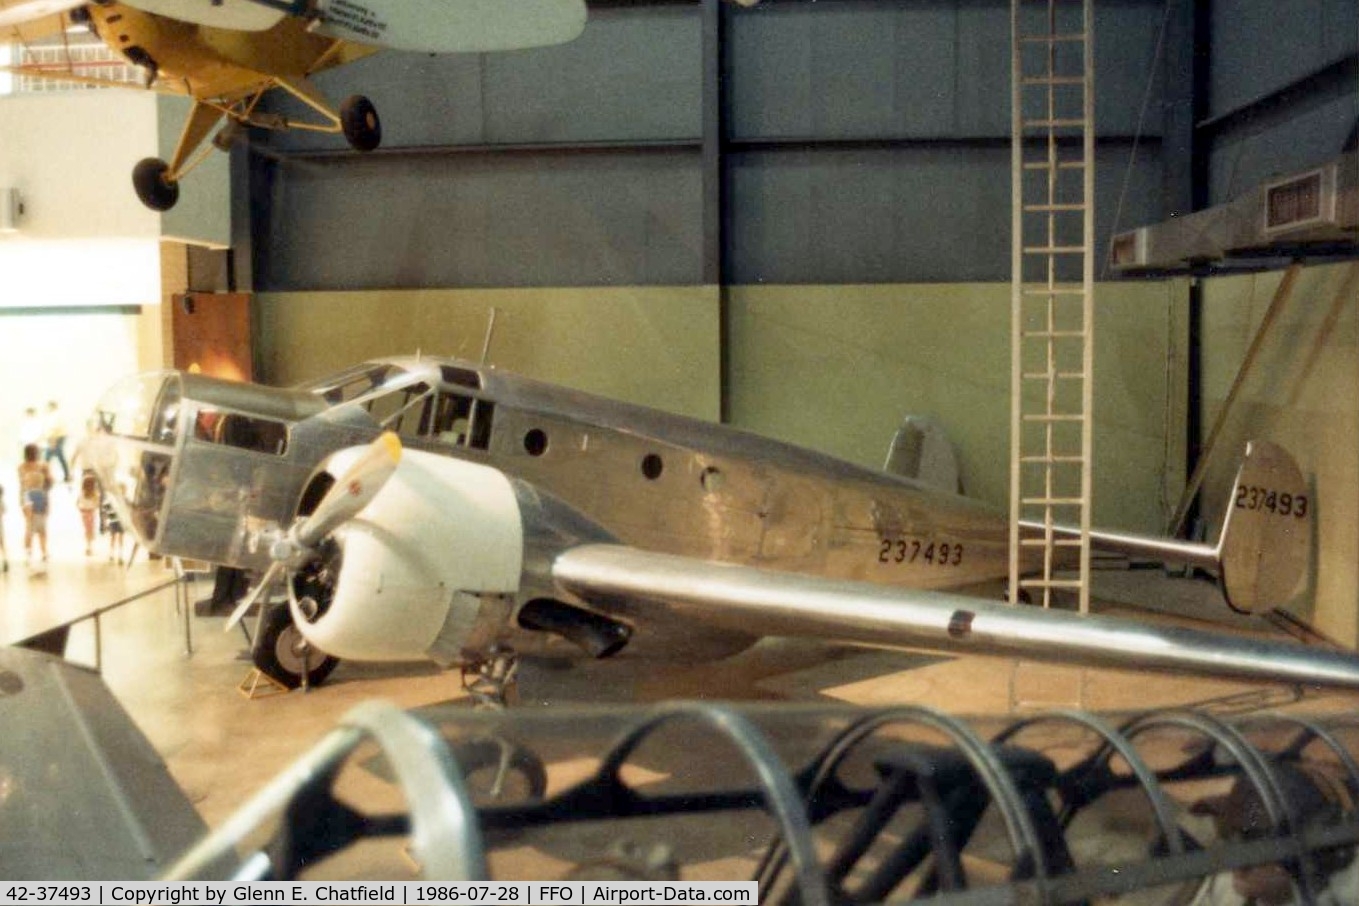 42-37493, 1942 Beech AT-11 Kansan C/N 4086, AT-11 at the National Museum of the U.S. Air Force